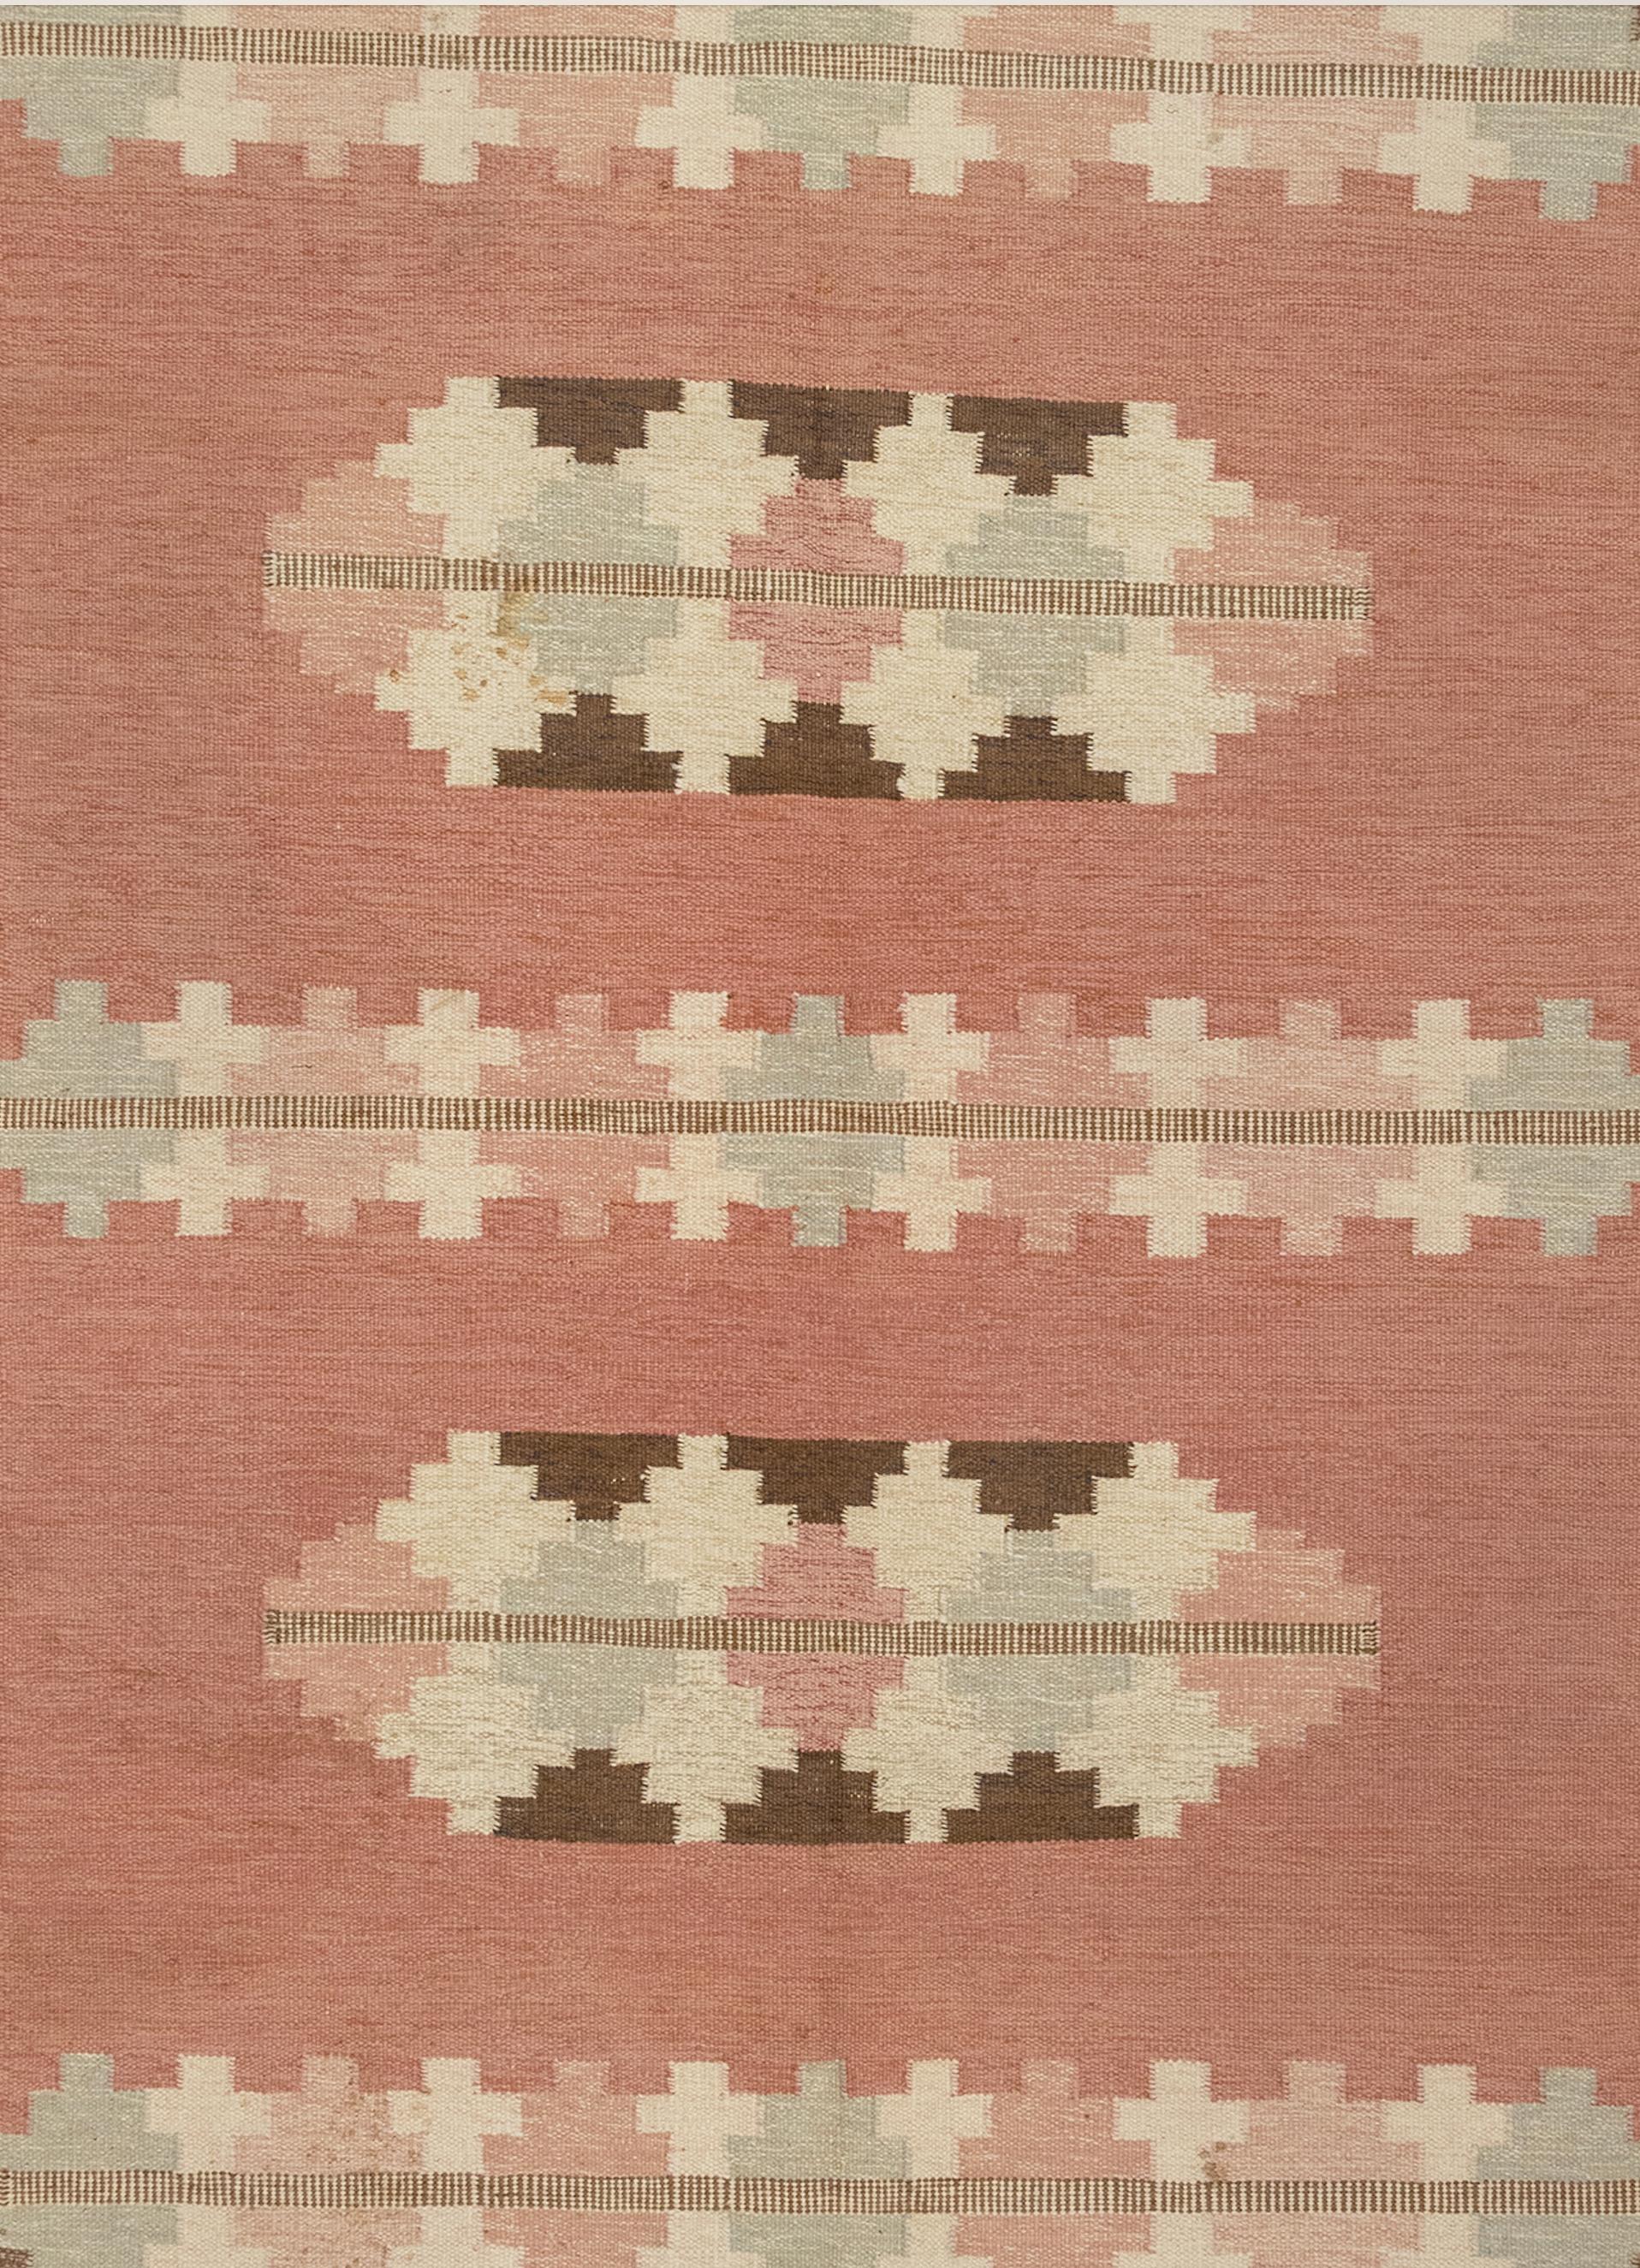 This is a Scandinavian flat-woven rug from the mid-20th century. It is signed by the designer. The color palette comprises of gentle shades of pink, icy blue, ivory, and brown in complementary geometric shapes that alternate in bands. All the